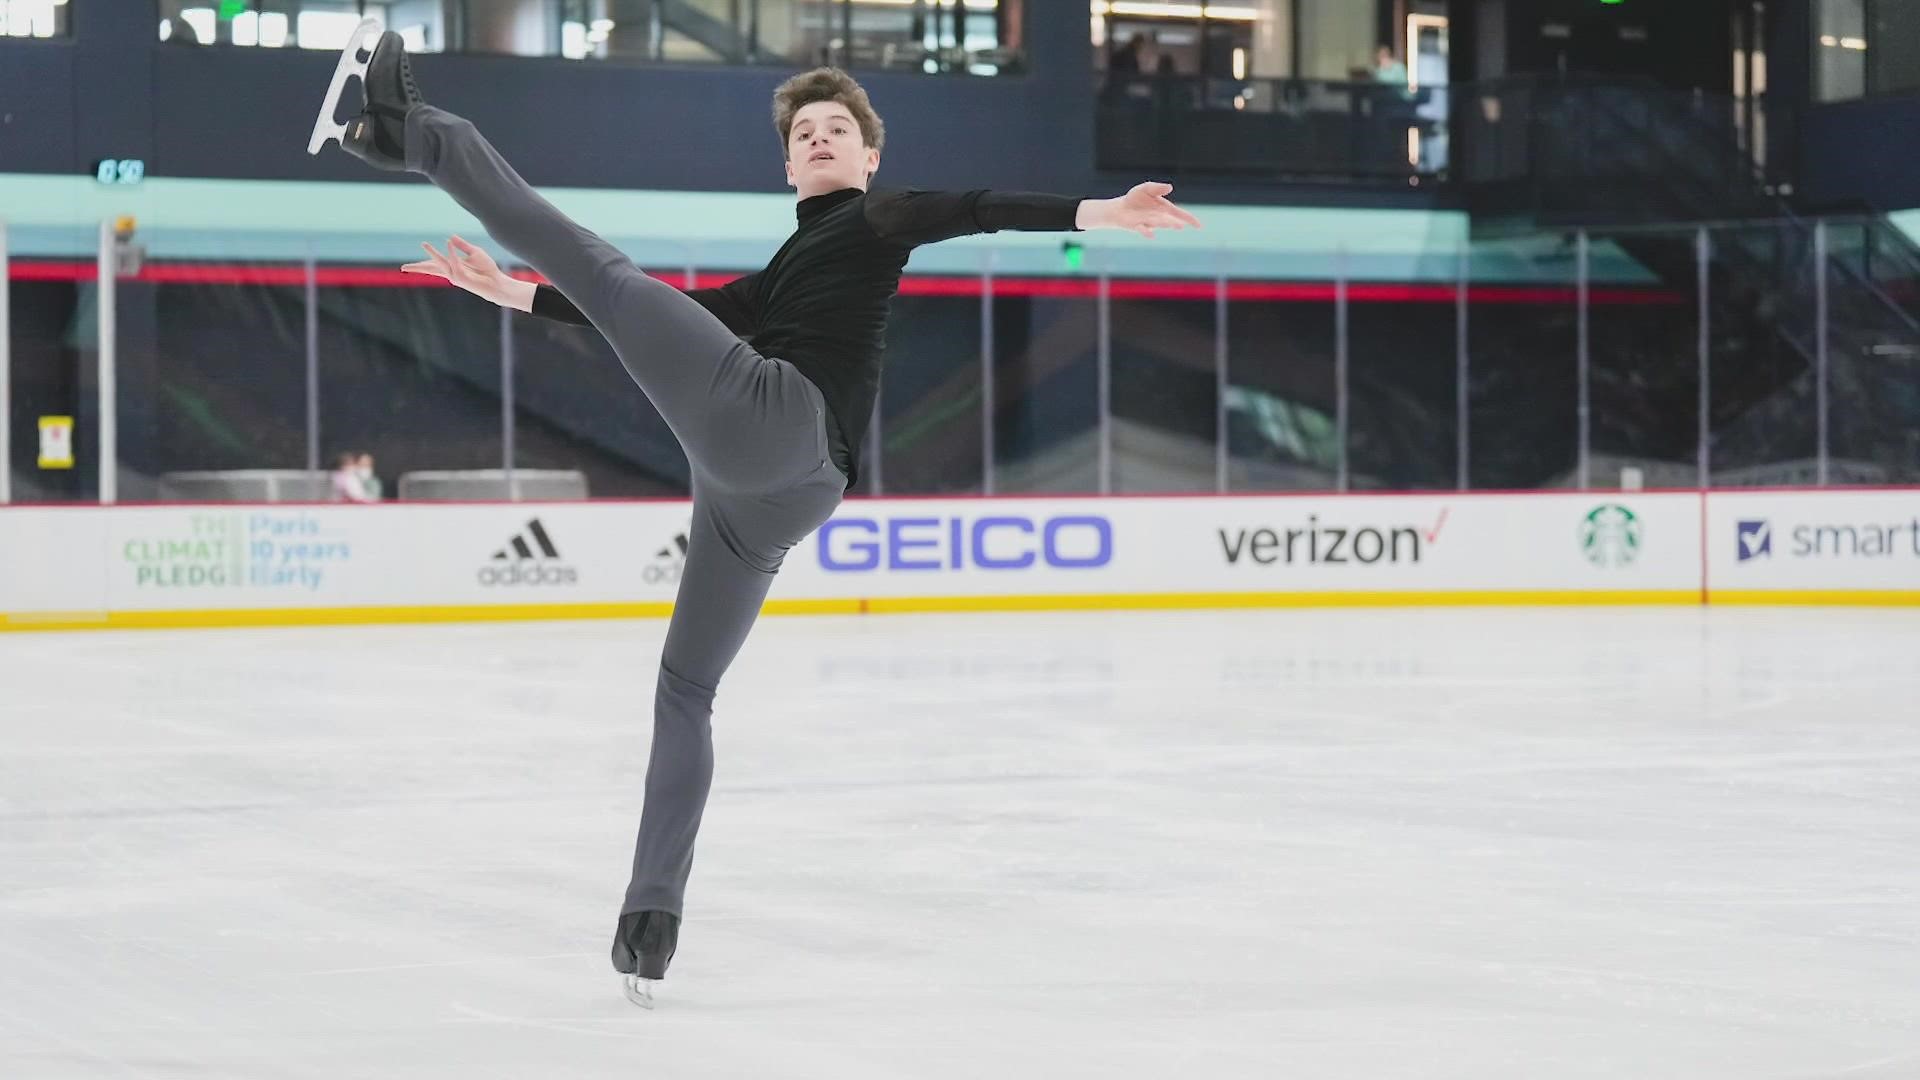 The Kraken Skating Academy is coaching the next generation of ice skaters, including one who just returned from international competition with two gold medals.